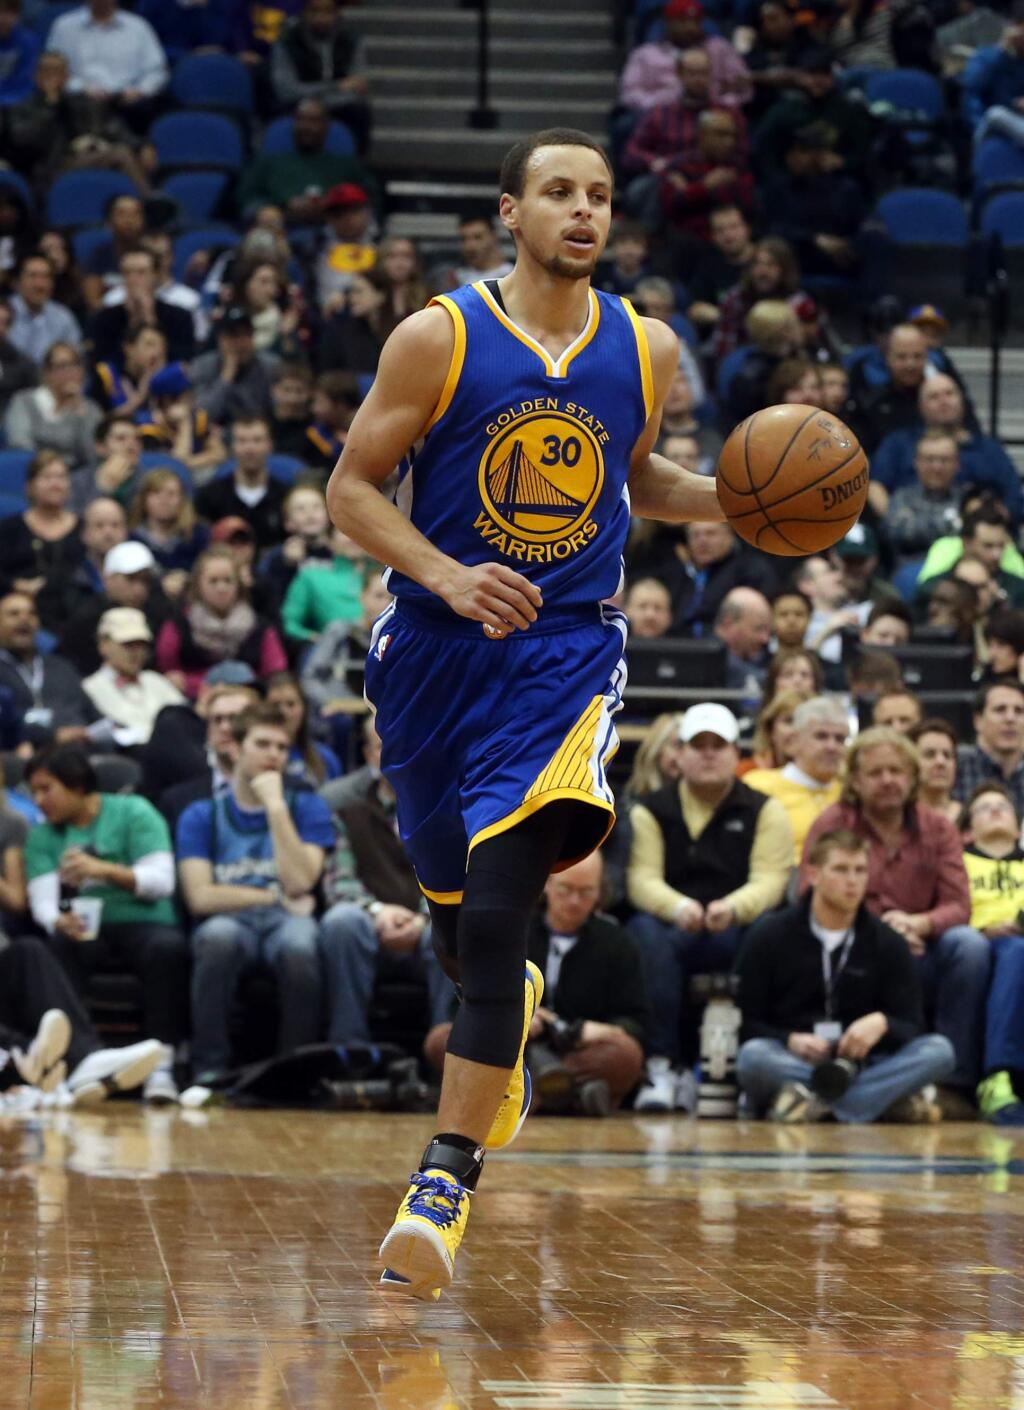 Golden State Warriors' Stephen Curry plays in the second half of an NBA basketball game against the Minnesota Timberwolves, Wednesday, Feb. 11, 2015, in Minneapolis. The Warriors won 94-91. (AP Photo/Jim Mone)